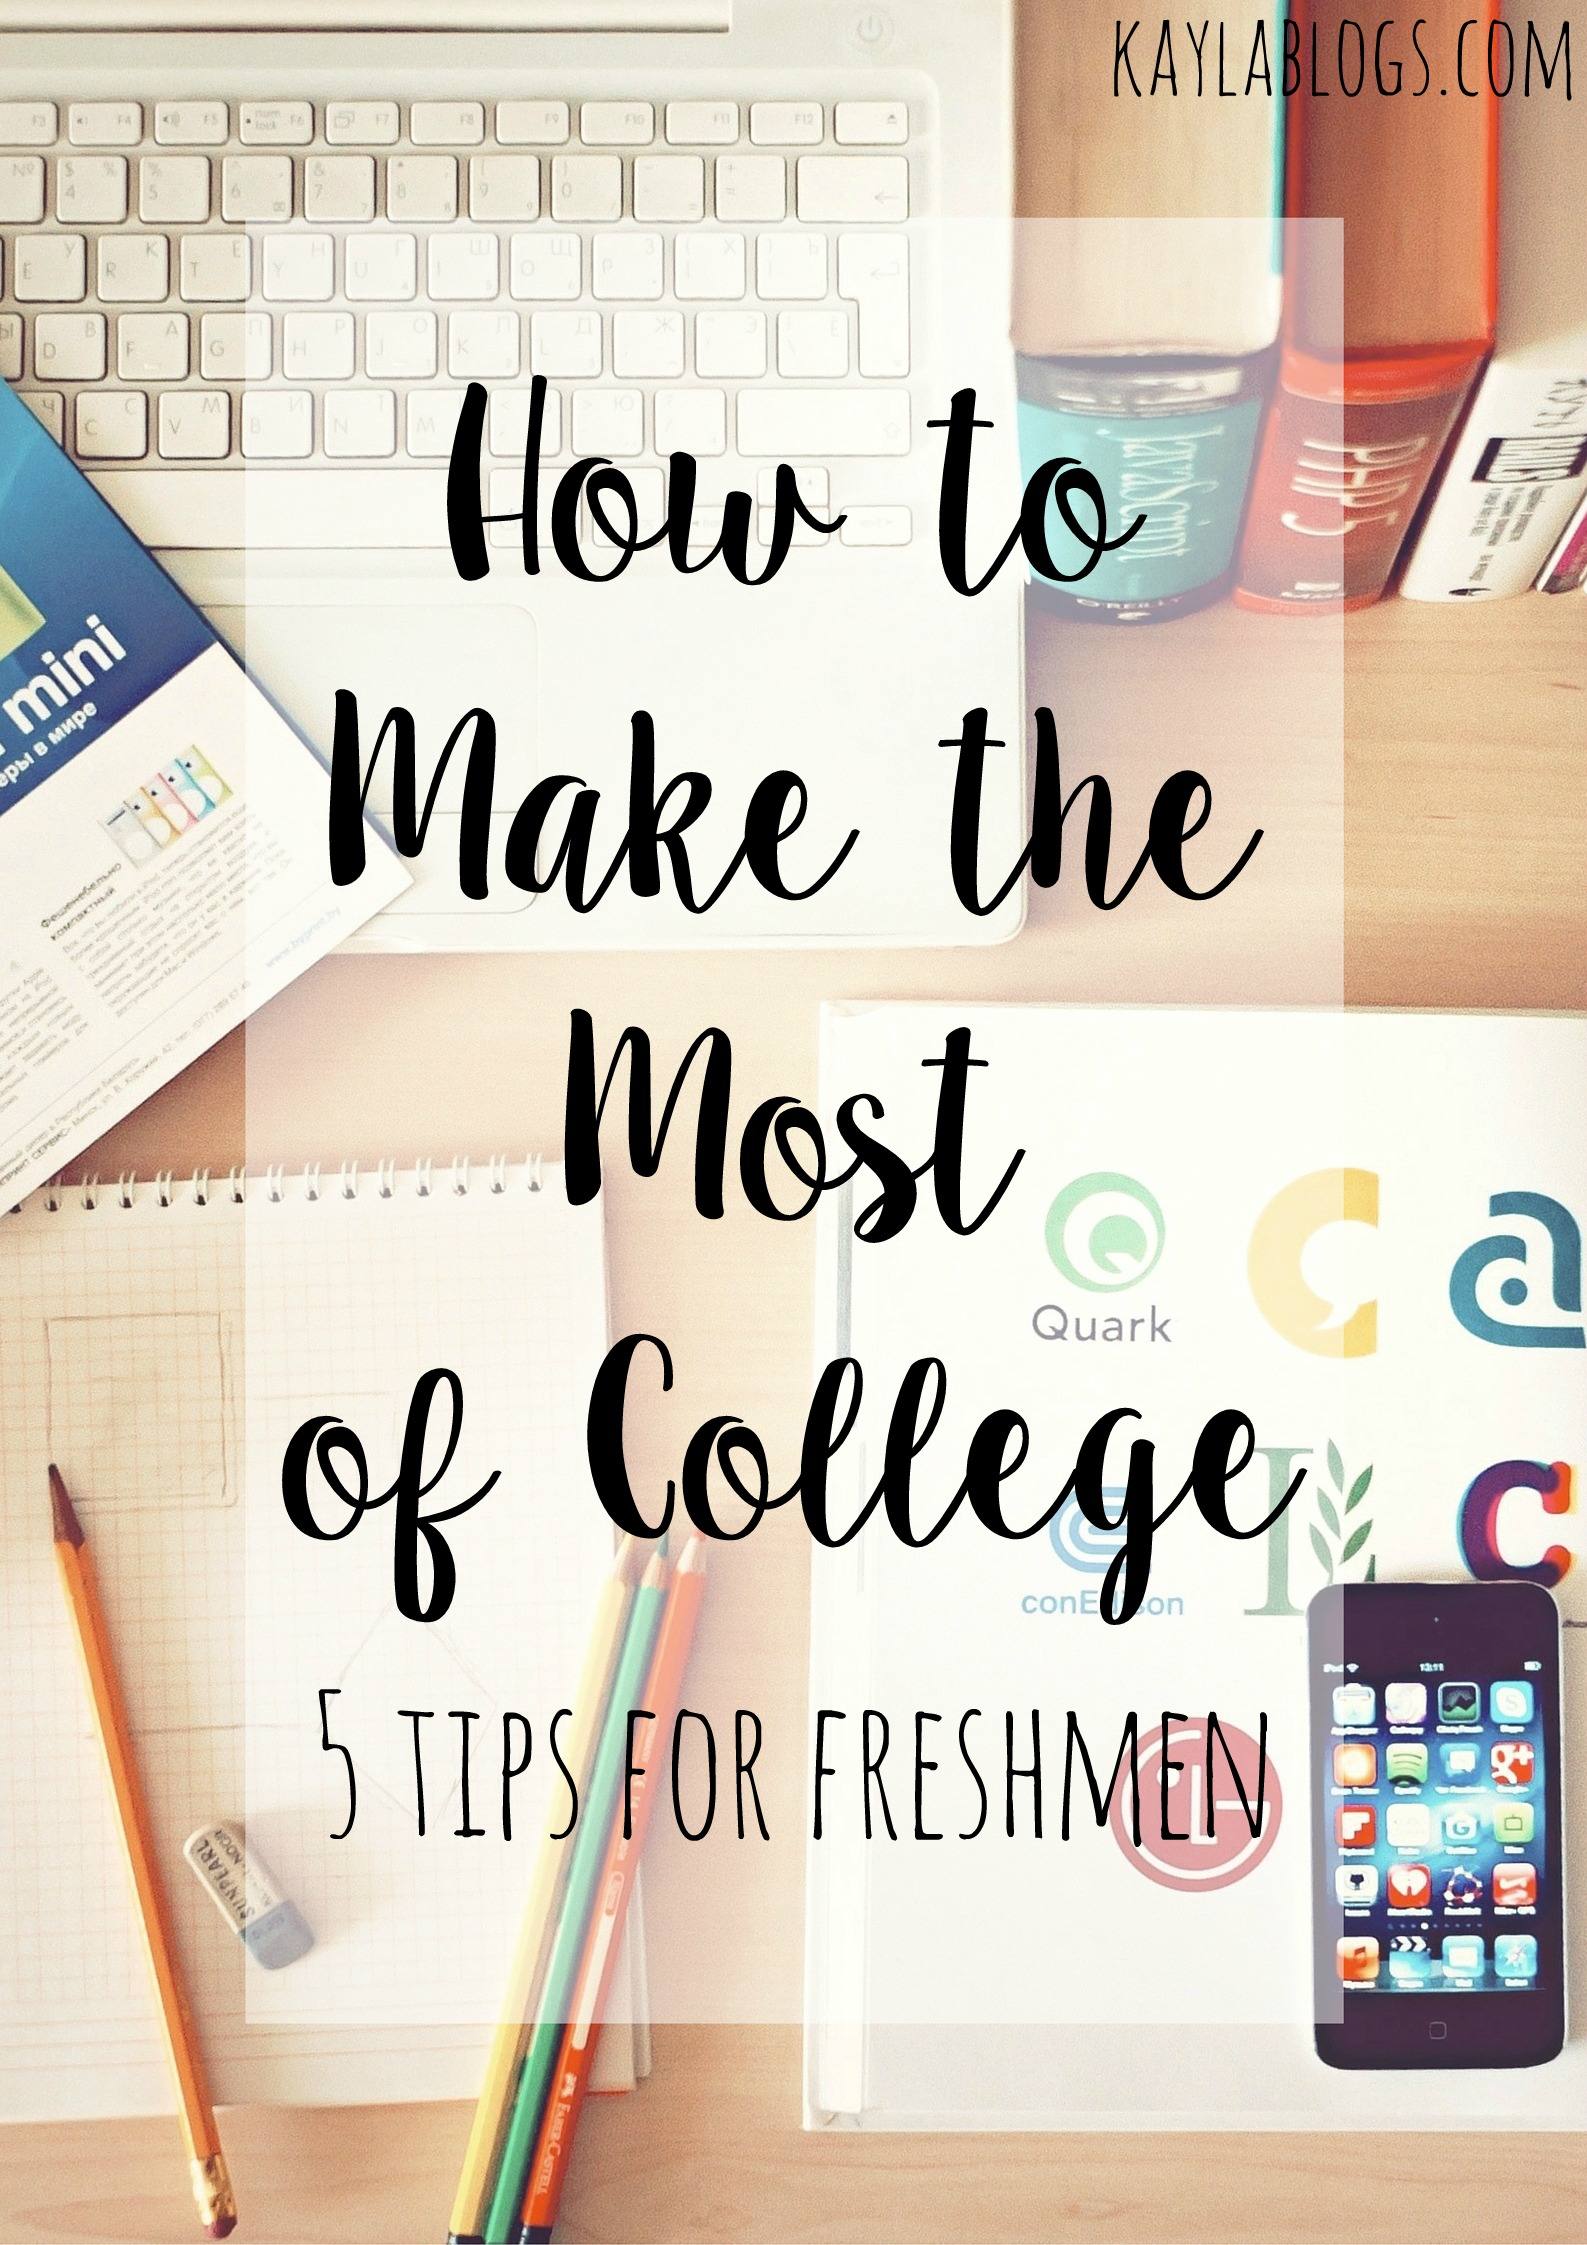 How to Make the Most of College | Kayla Blogs